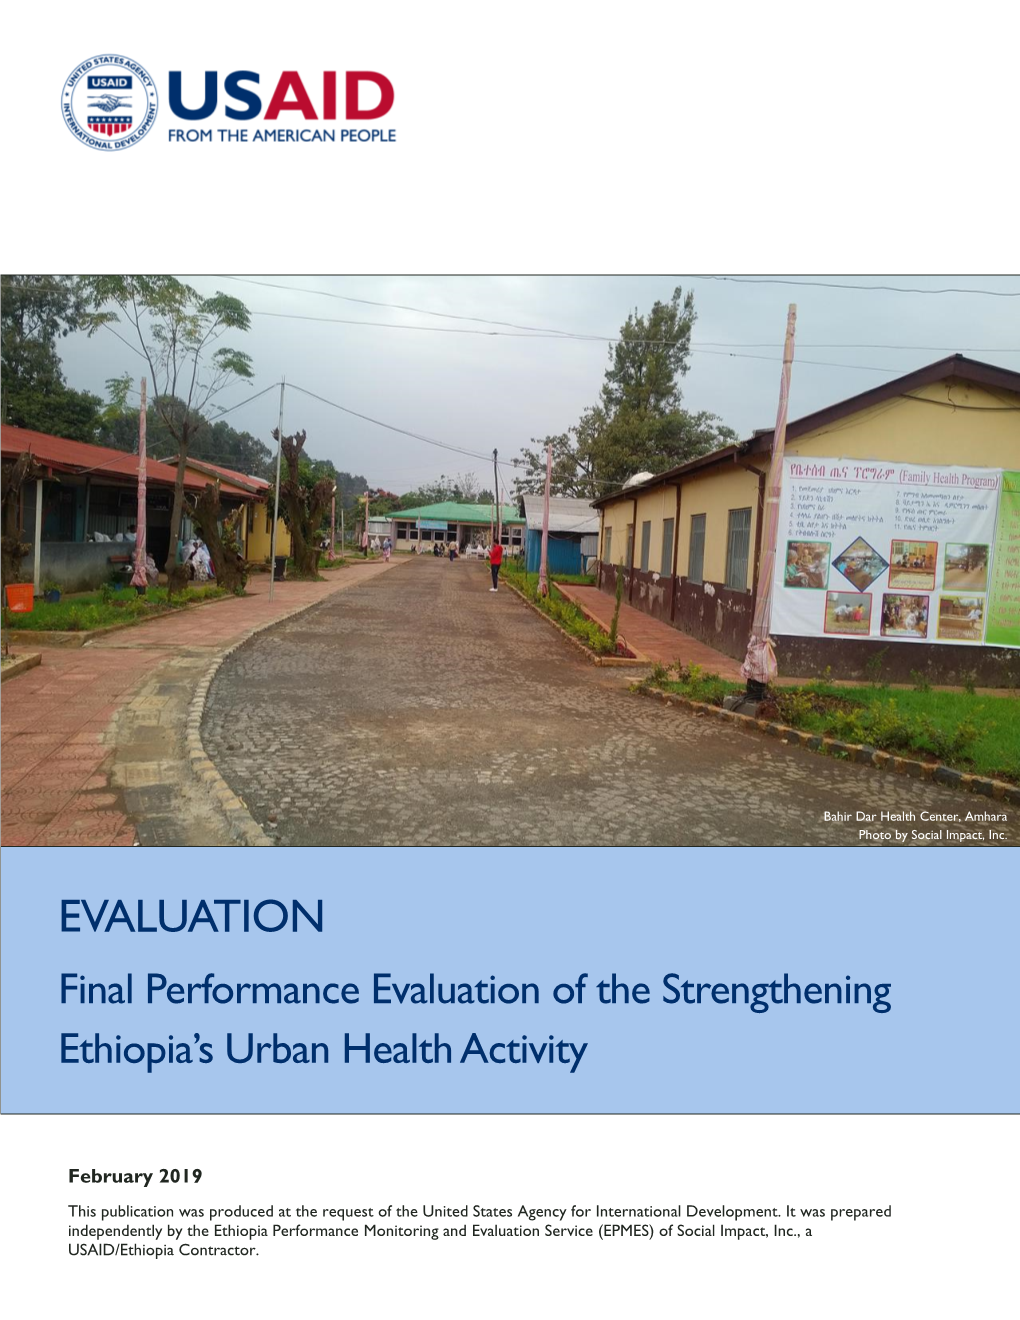 Final Performance Evaluation of the Strengthening Ethiopia's Urban Health Activity